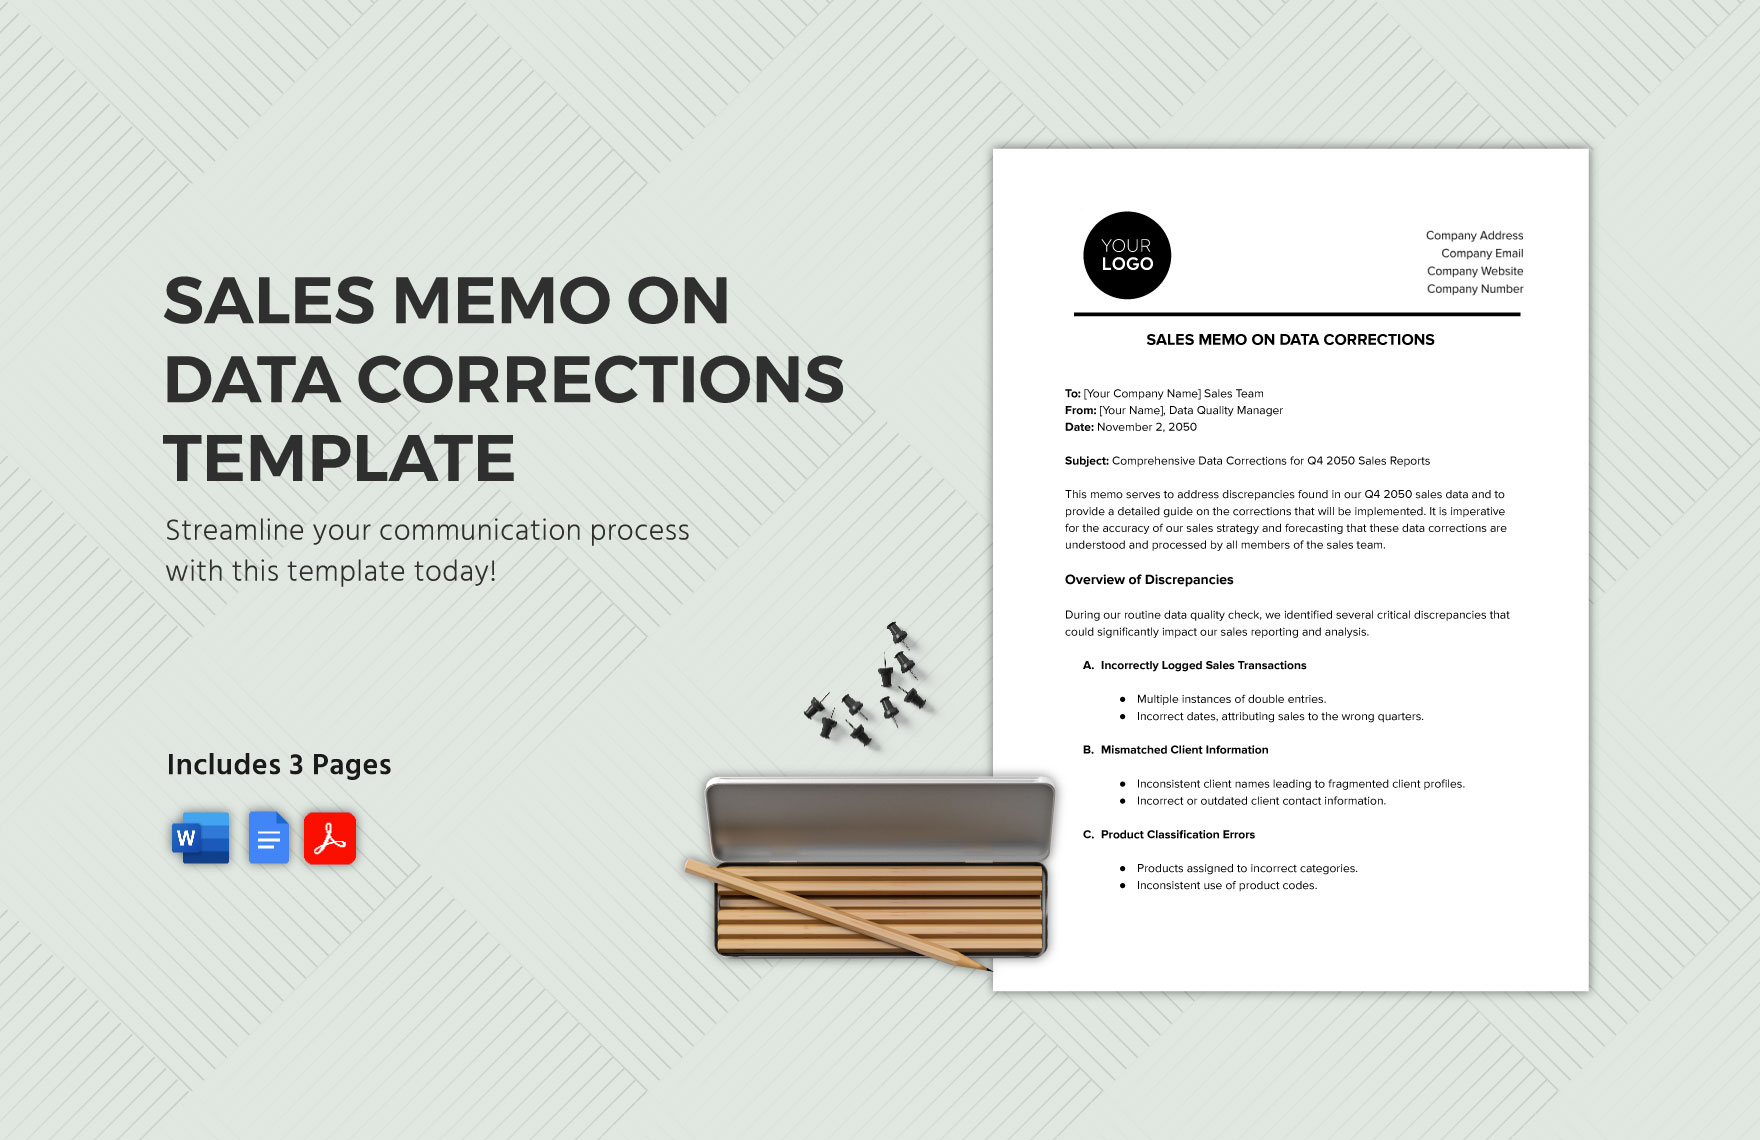 Sales Memo on Data Corrections Template